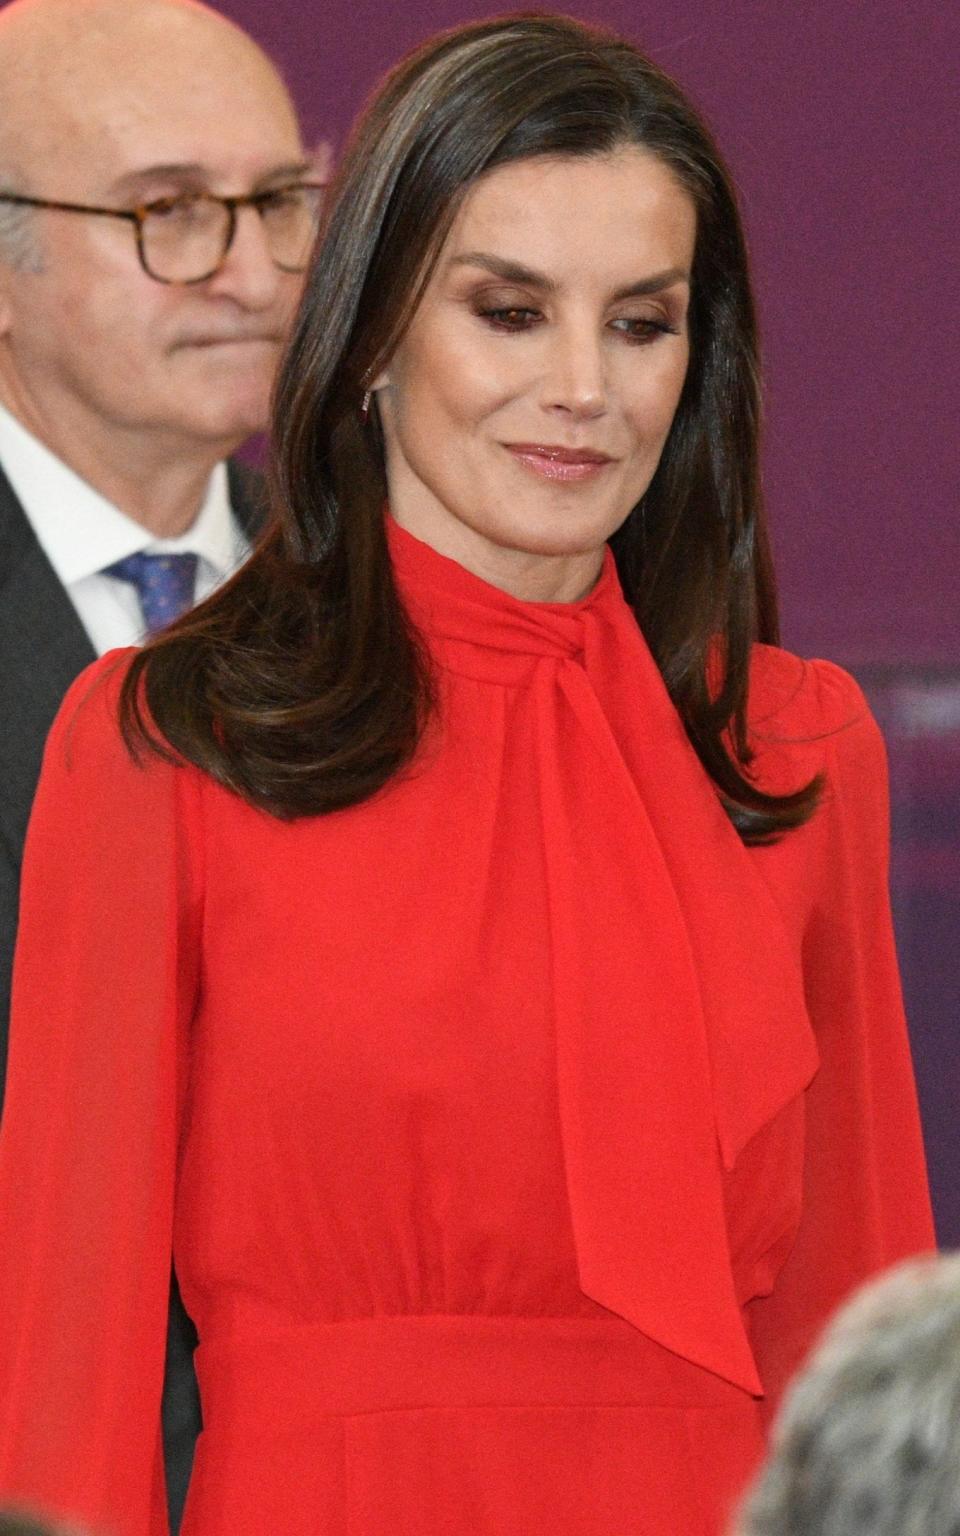 Queen Letizia of Spain wearing a red pussy-bow blouse at the Royal Palace of El Pardo in Madrid - Getty 